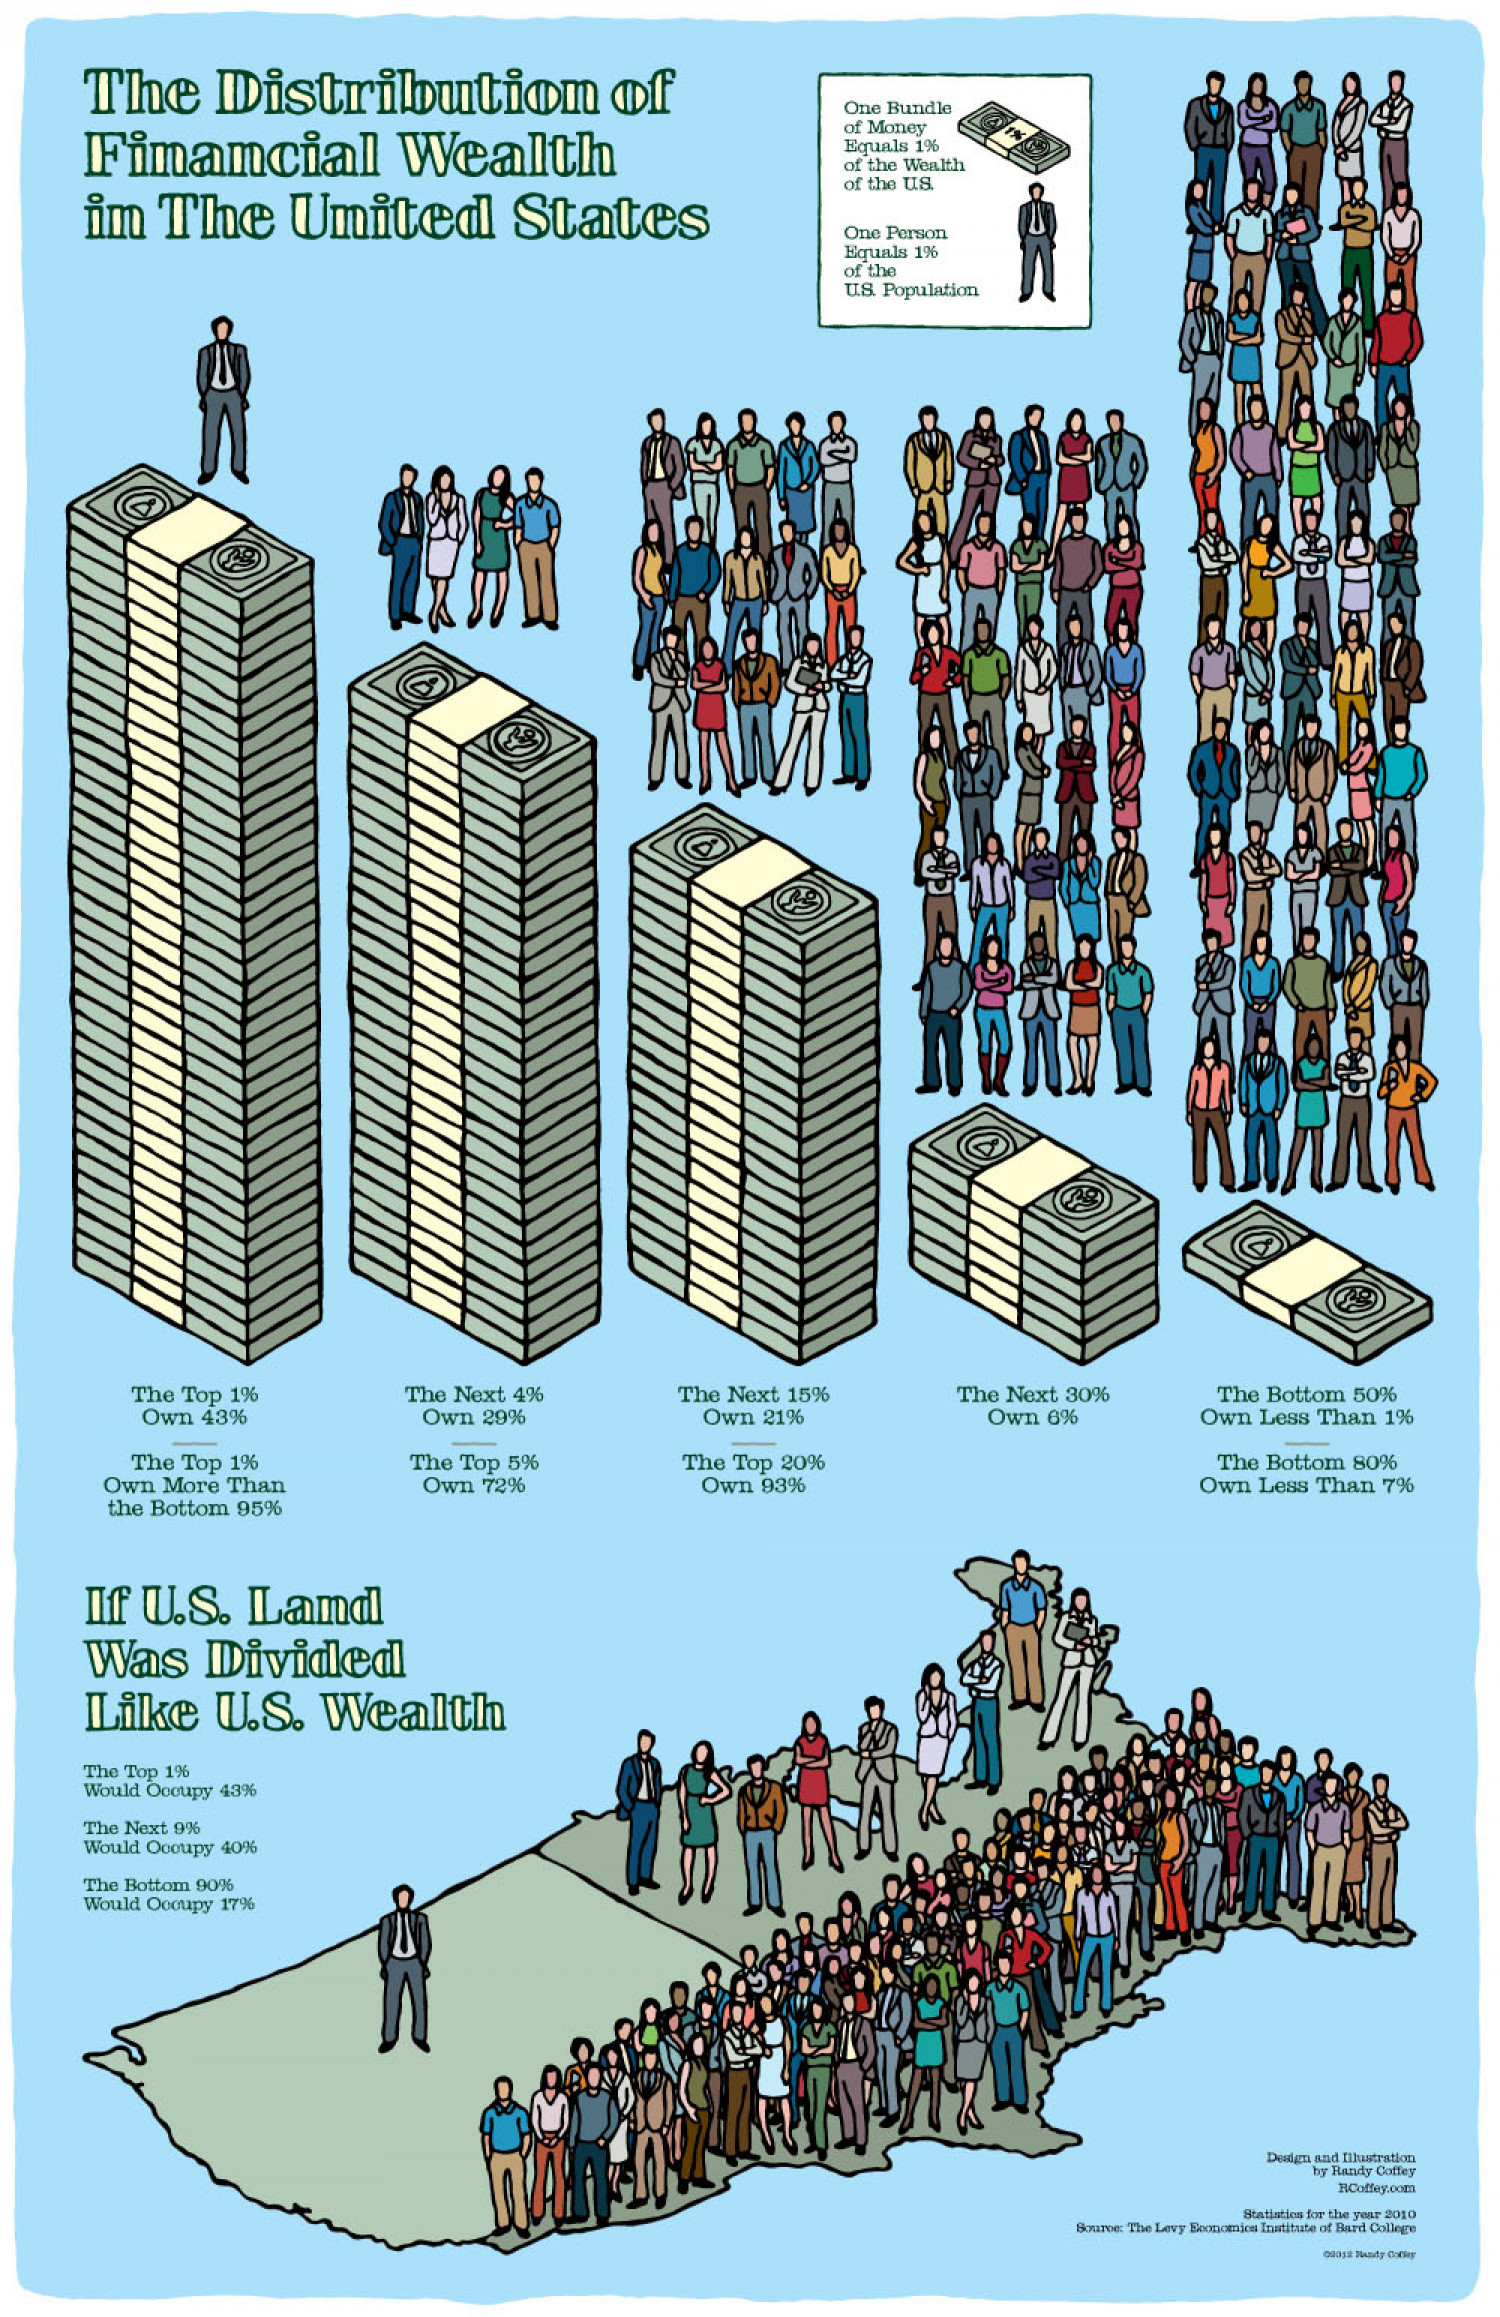 infographic wealth inequality - The Distribution of Financial Wealth im The Umited States The The Chu To Thai On Thi The Te Ott The Dr. The Tit O De Tils Il Wins Divided us. Wealth Wg